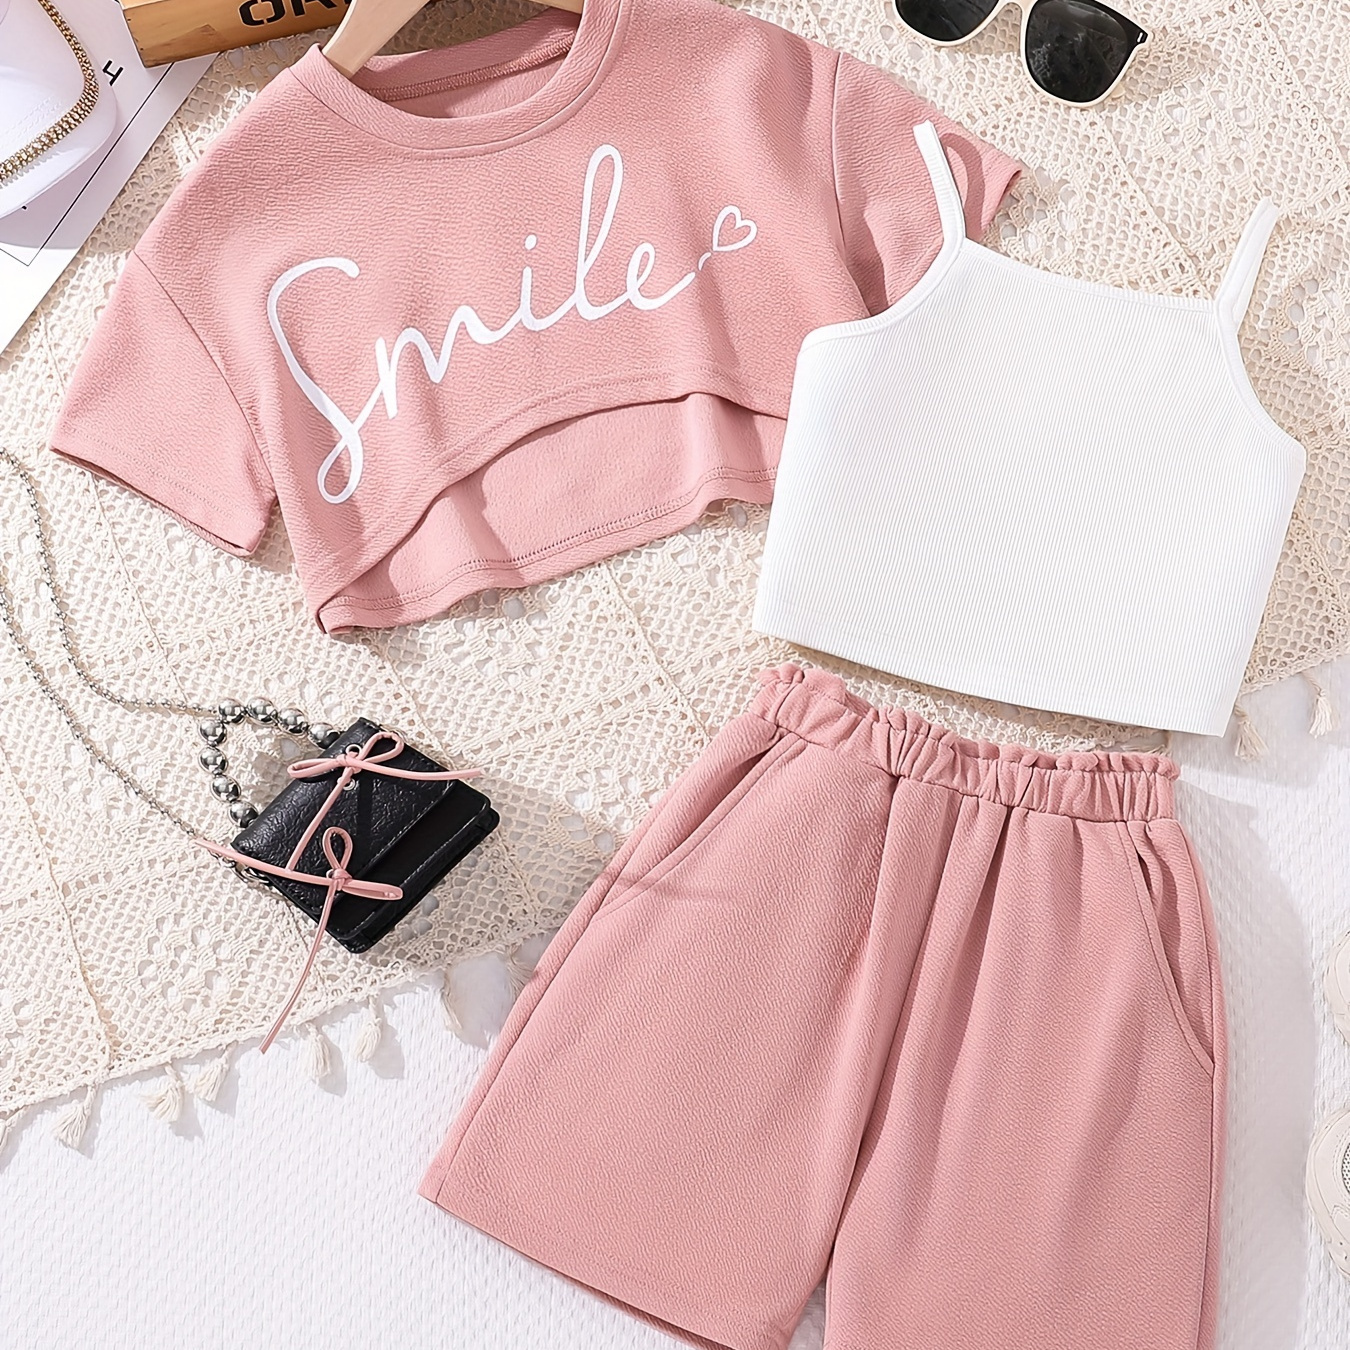 

Girl's Solid Smile Print Outfit, Crop Tee + Camisole + Shorts Set, Everyday Casual 3pcs Girls Summer Clothes